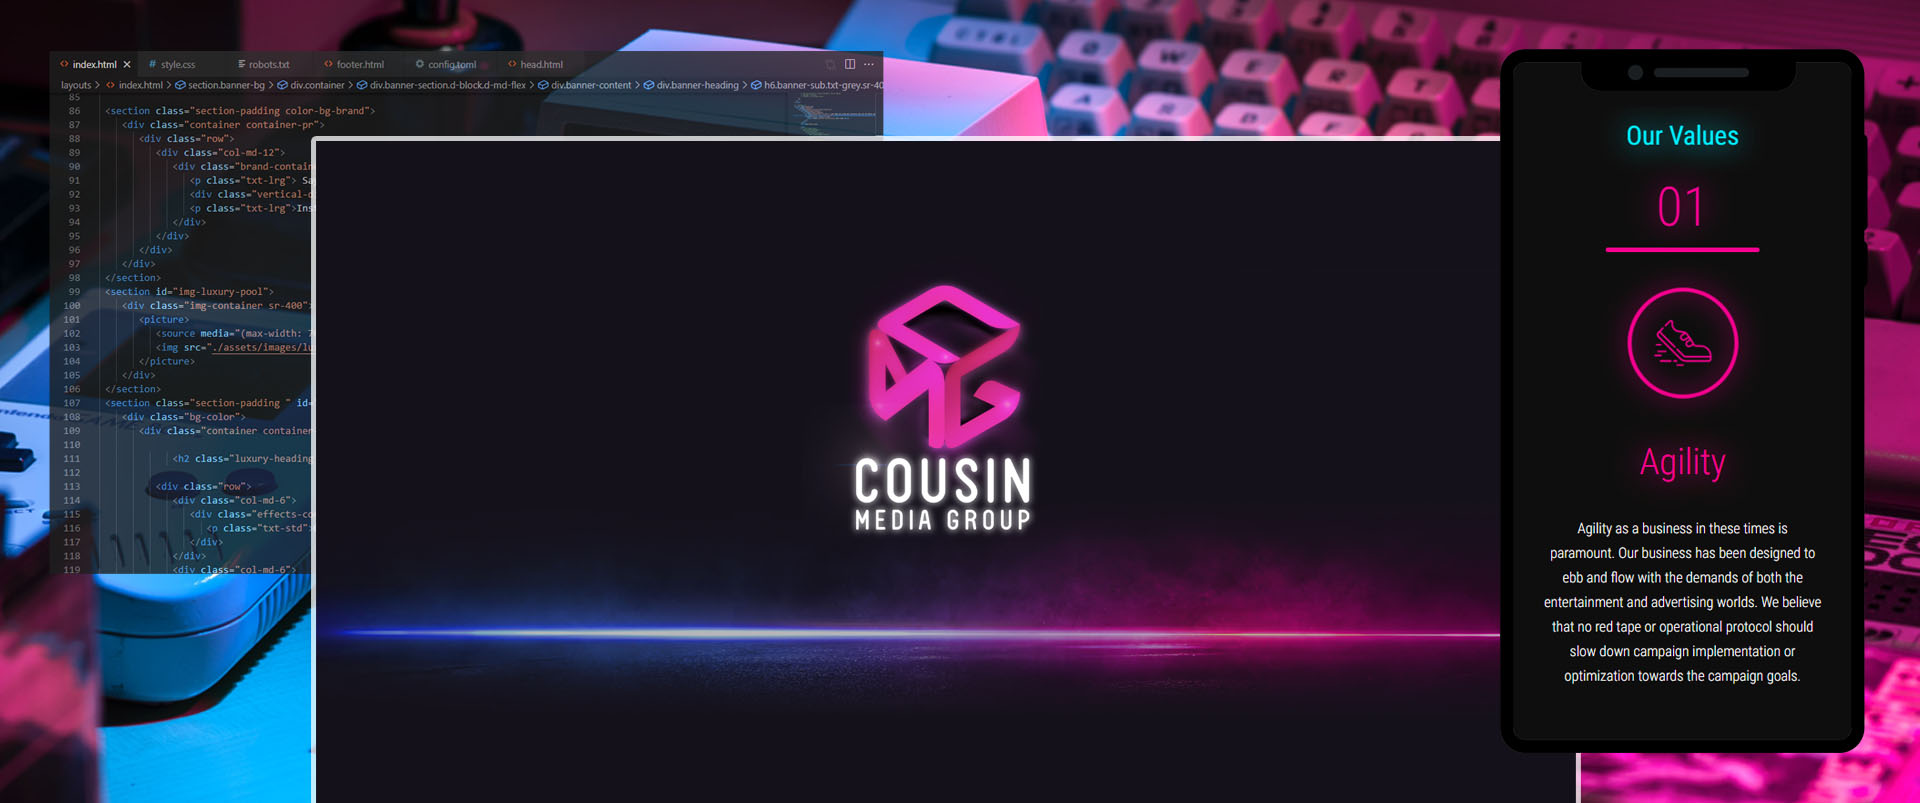 Colony Web Solutions - Cousin MG